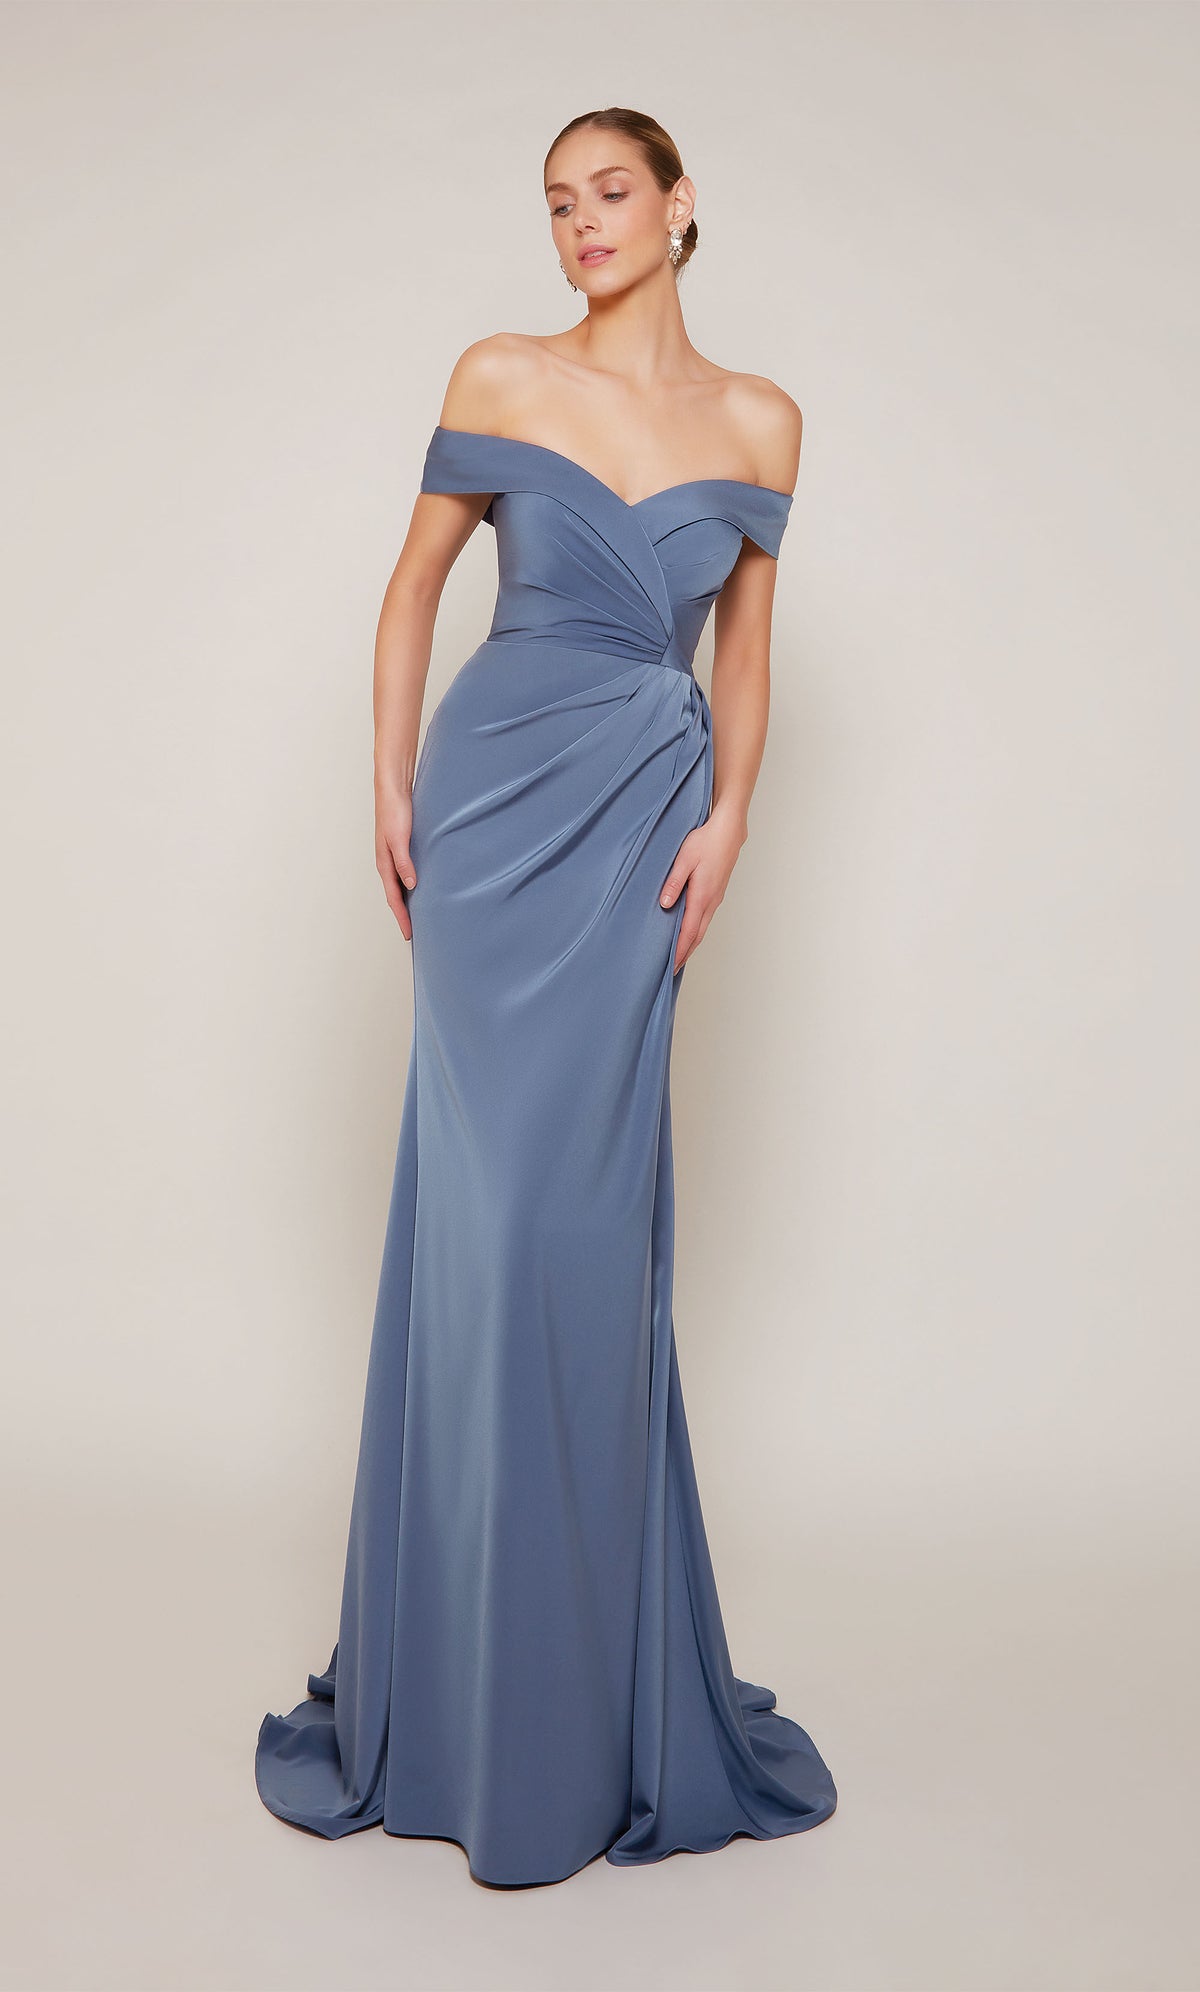 A sophisticated, off-the-shoulder wedding guest dress with a pleated zipper back and train in dark french blue.